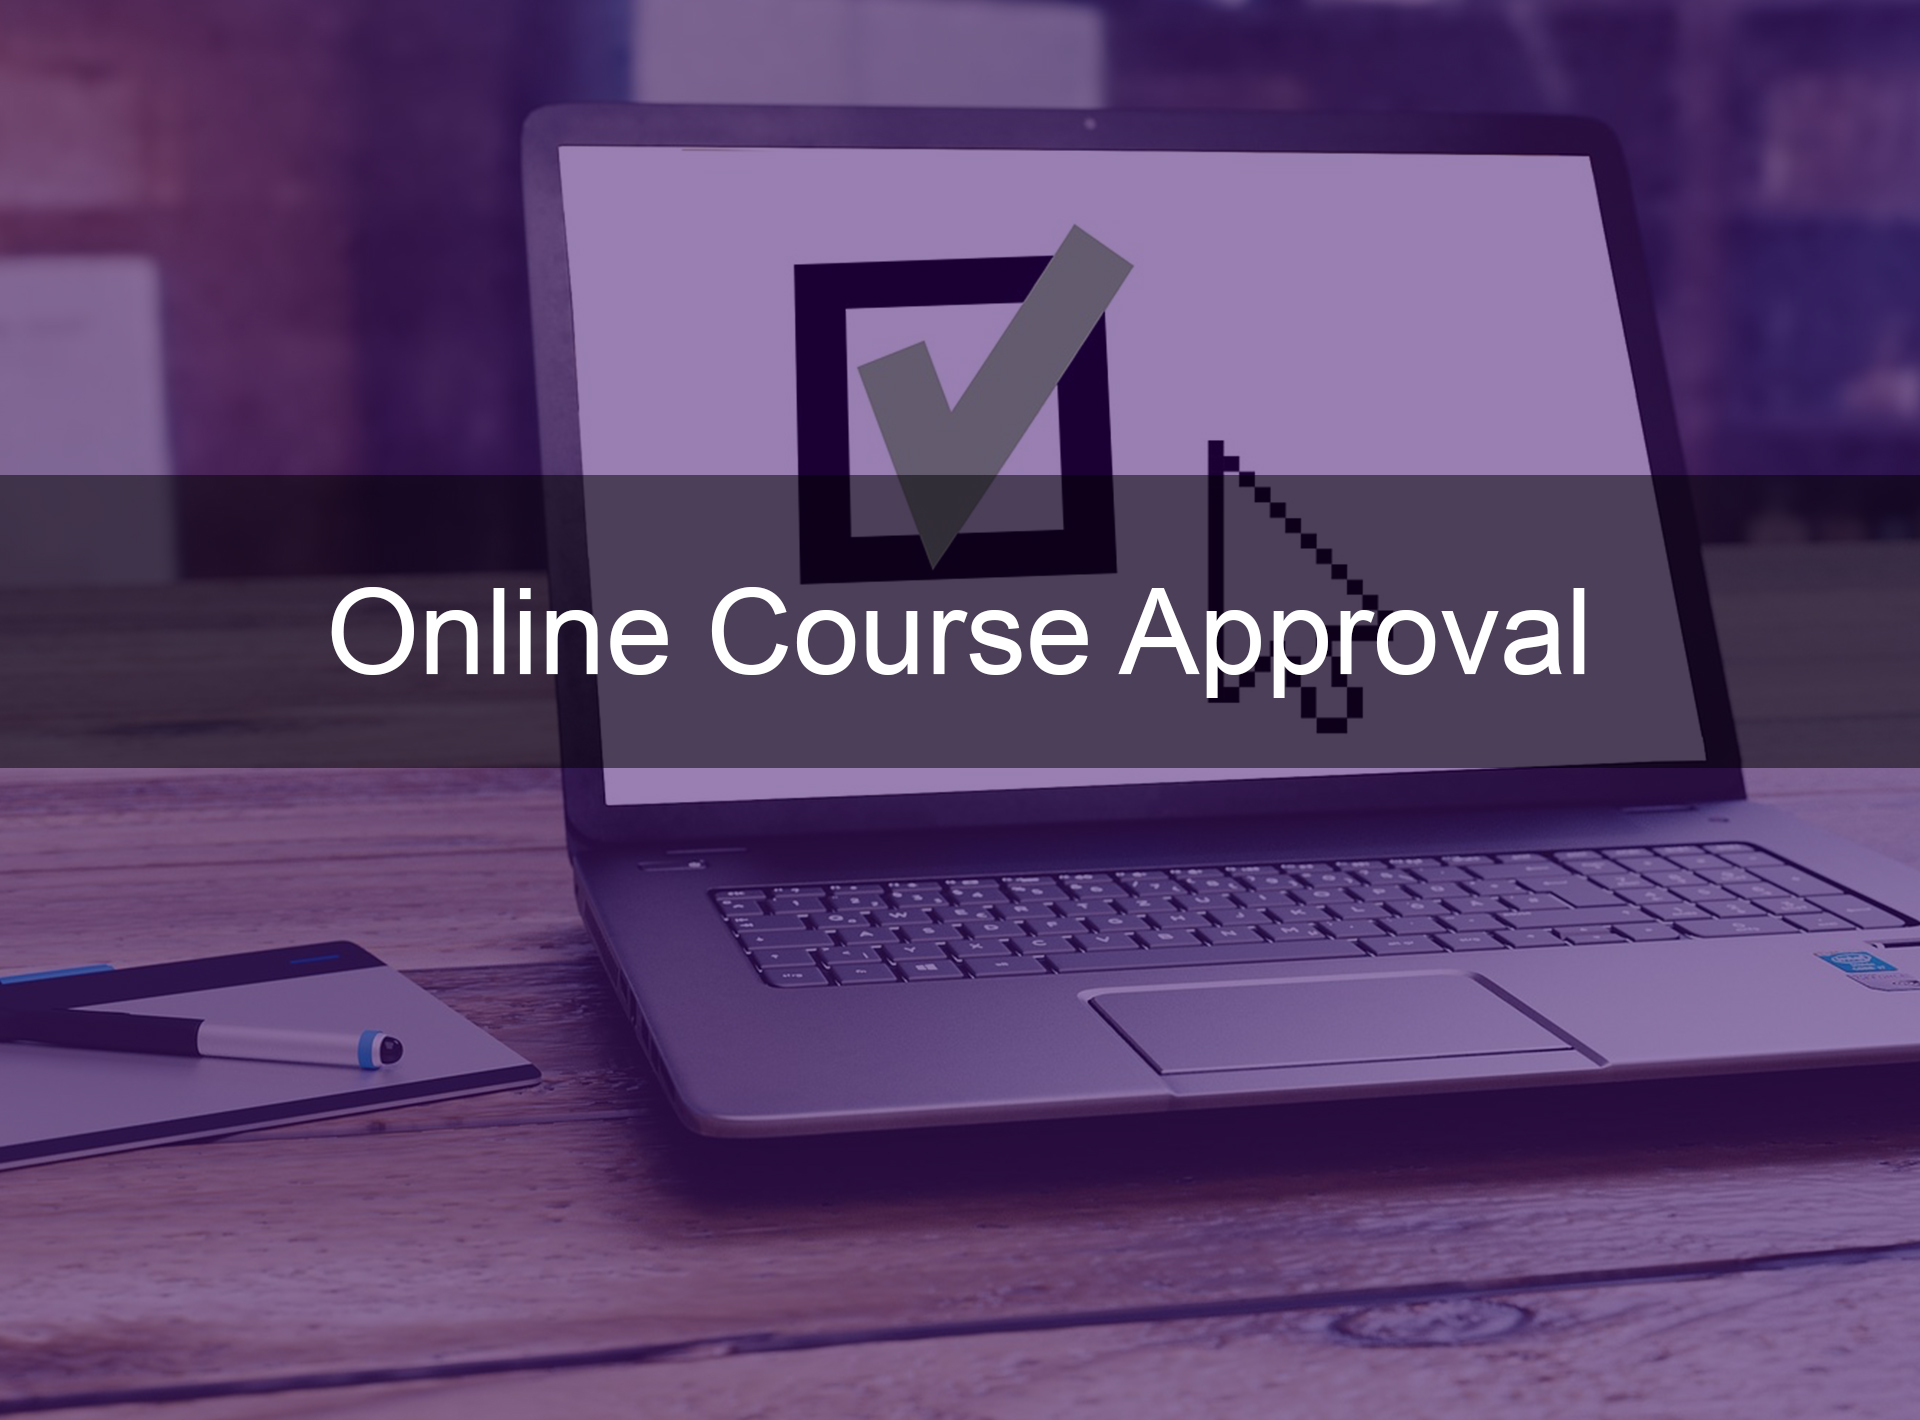 Online Course Approval Overview